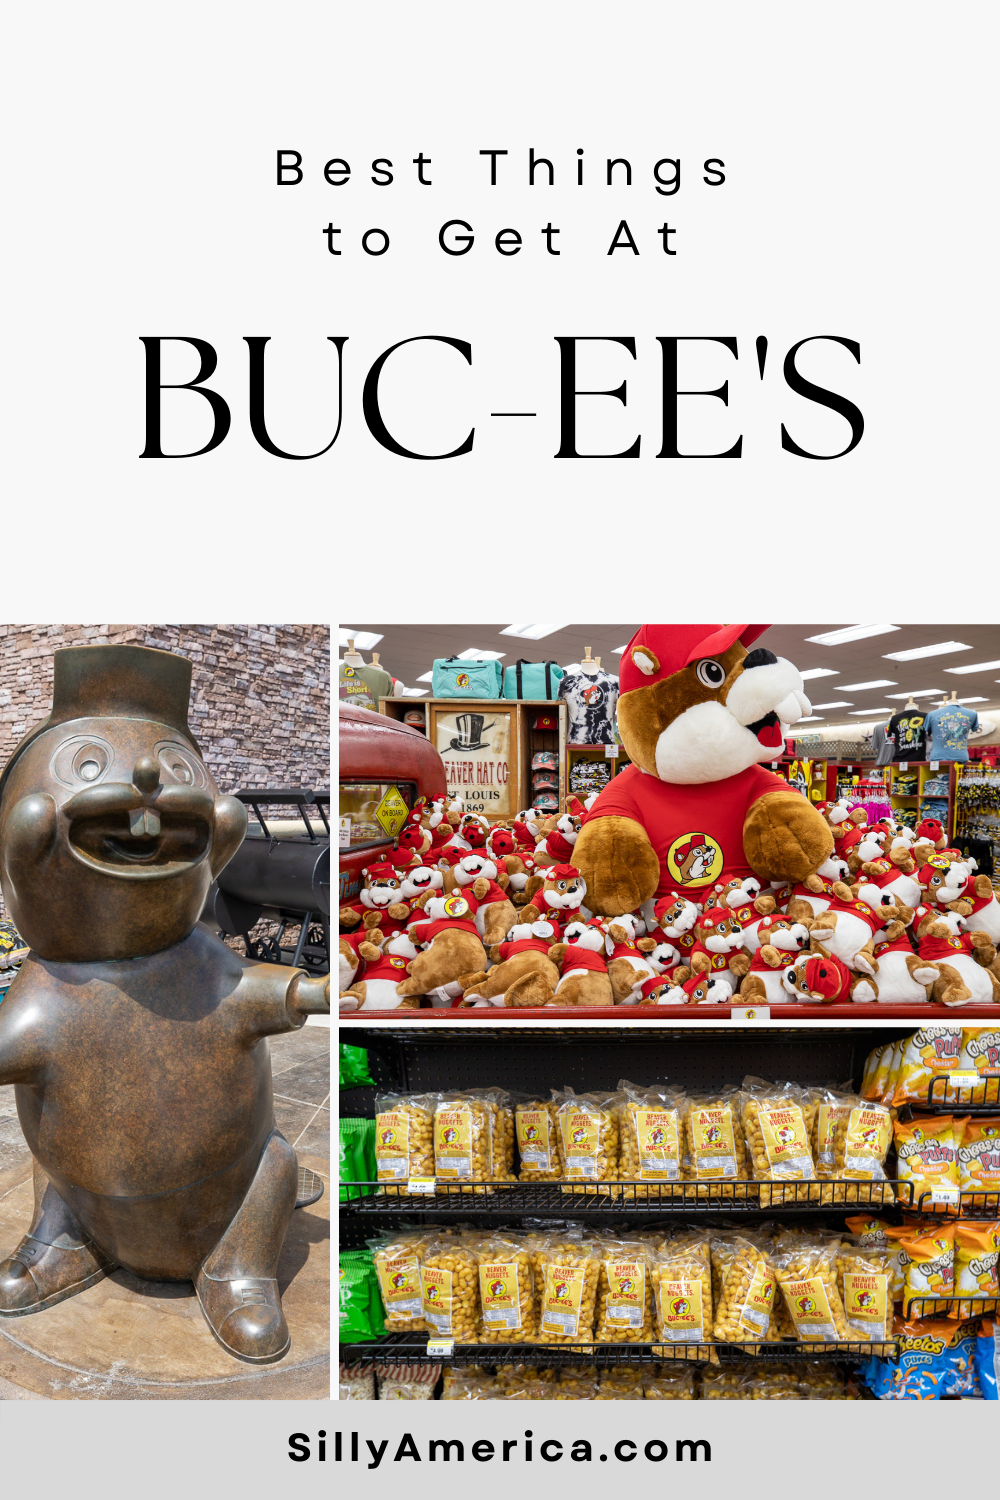 Buc-ee's is a popular travel center chain that is lures travelers in with an impressive fleet of fueling stations, a massive convenience store, and some of the cleanest bathrooms you'll find on the road. I asked my Instagram followers what to get at Buc-ee's. And they had opinions. Lots of opinions. Here is a list of the best things to get at Buc-ee's, as suggested by my Instagram followers. #Texas #RoadTrip #RoadTripStop #Bucees #Travel #TexasRoadTrip